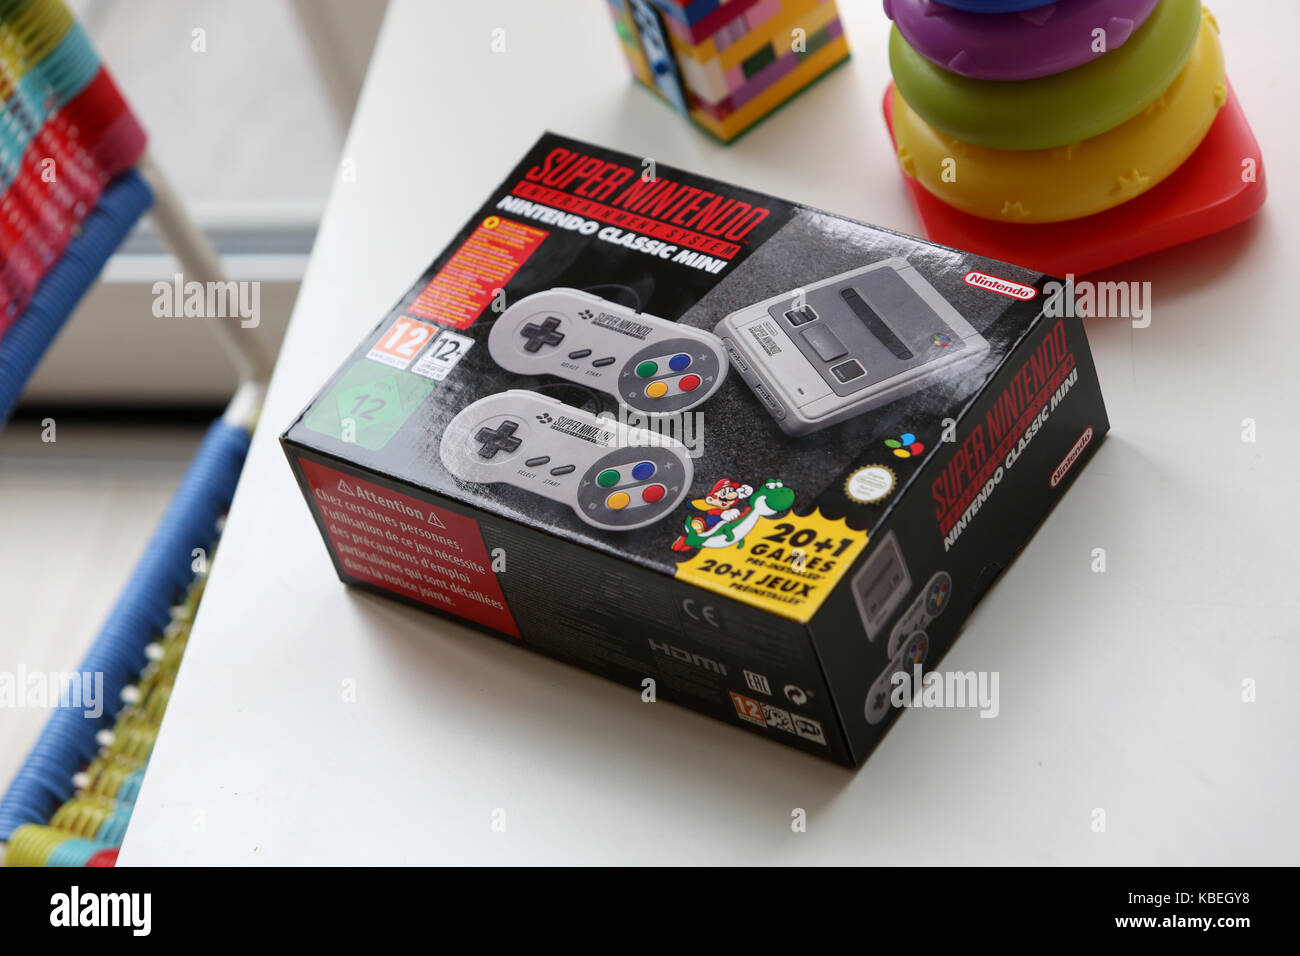 The new Nintendo SNES Mini, (Super Nintendo Entertainment System) pictured at a home in Chichester, West Sussex, UK. Stock Photo